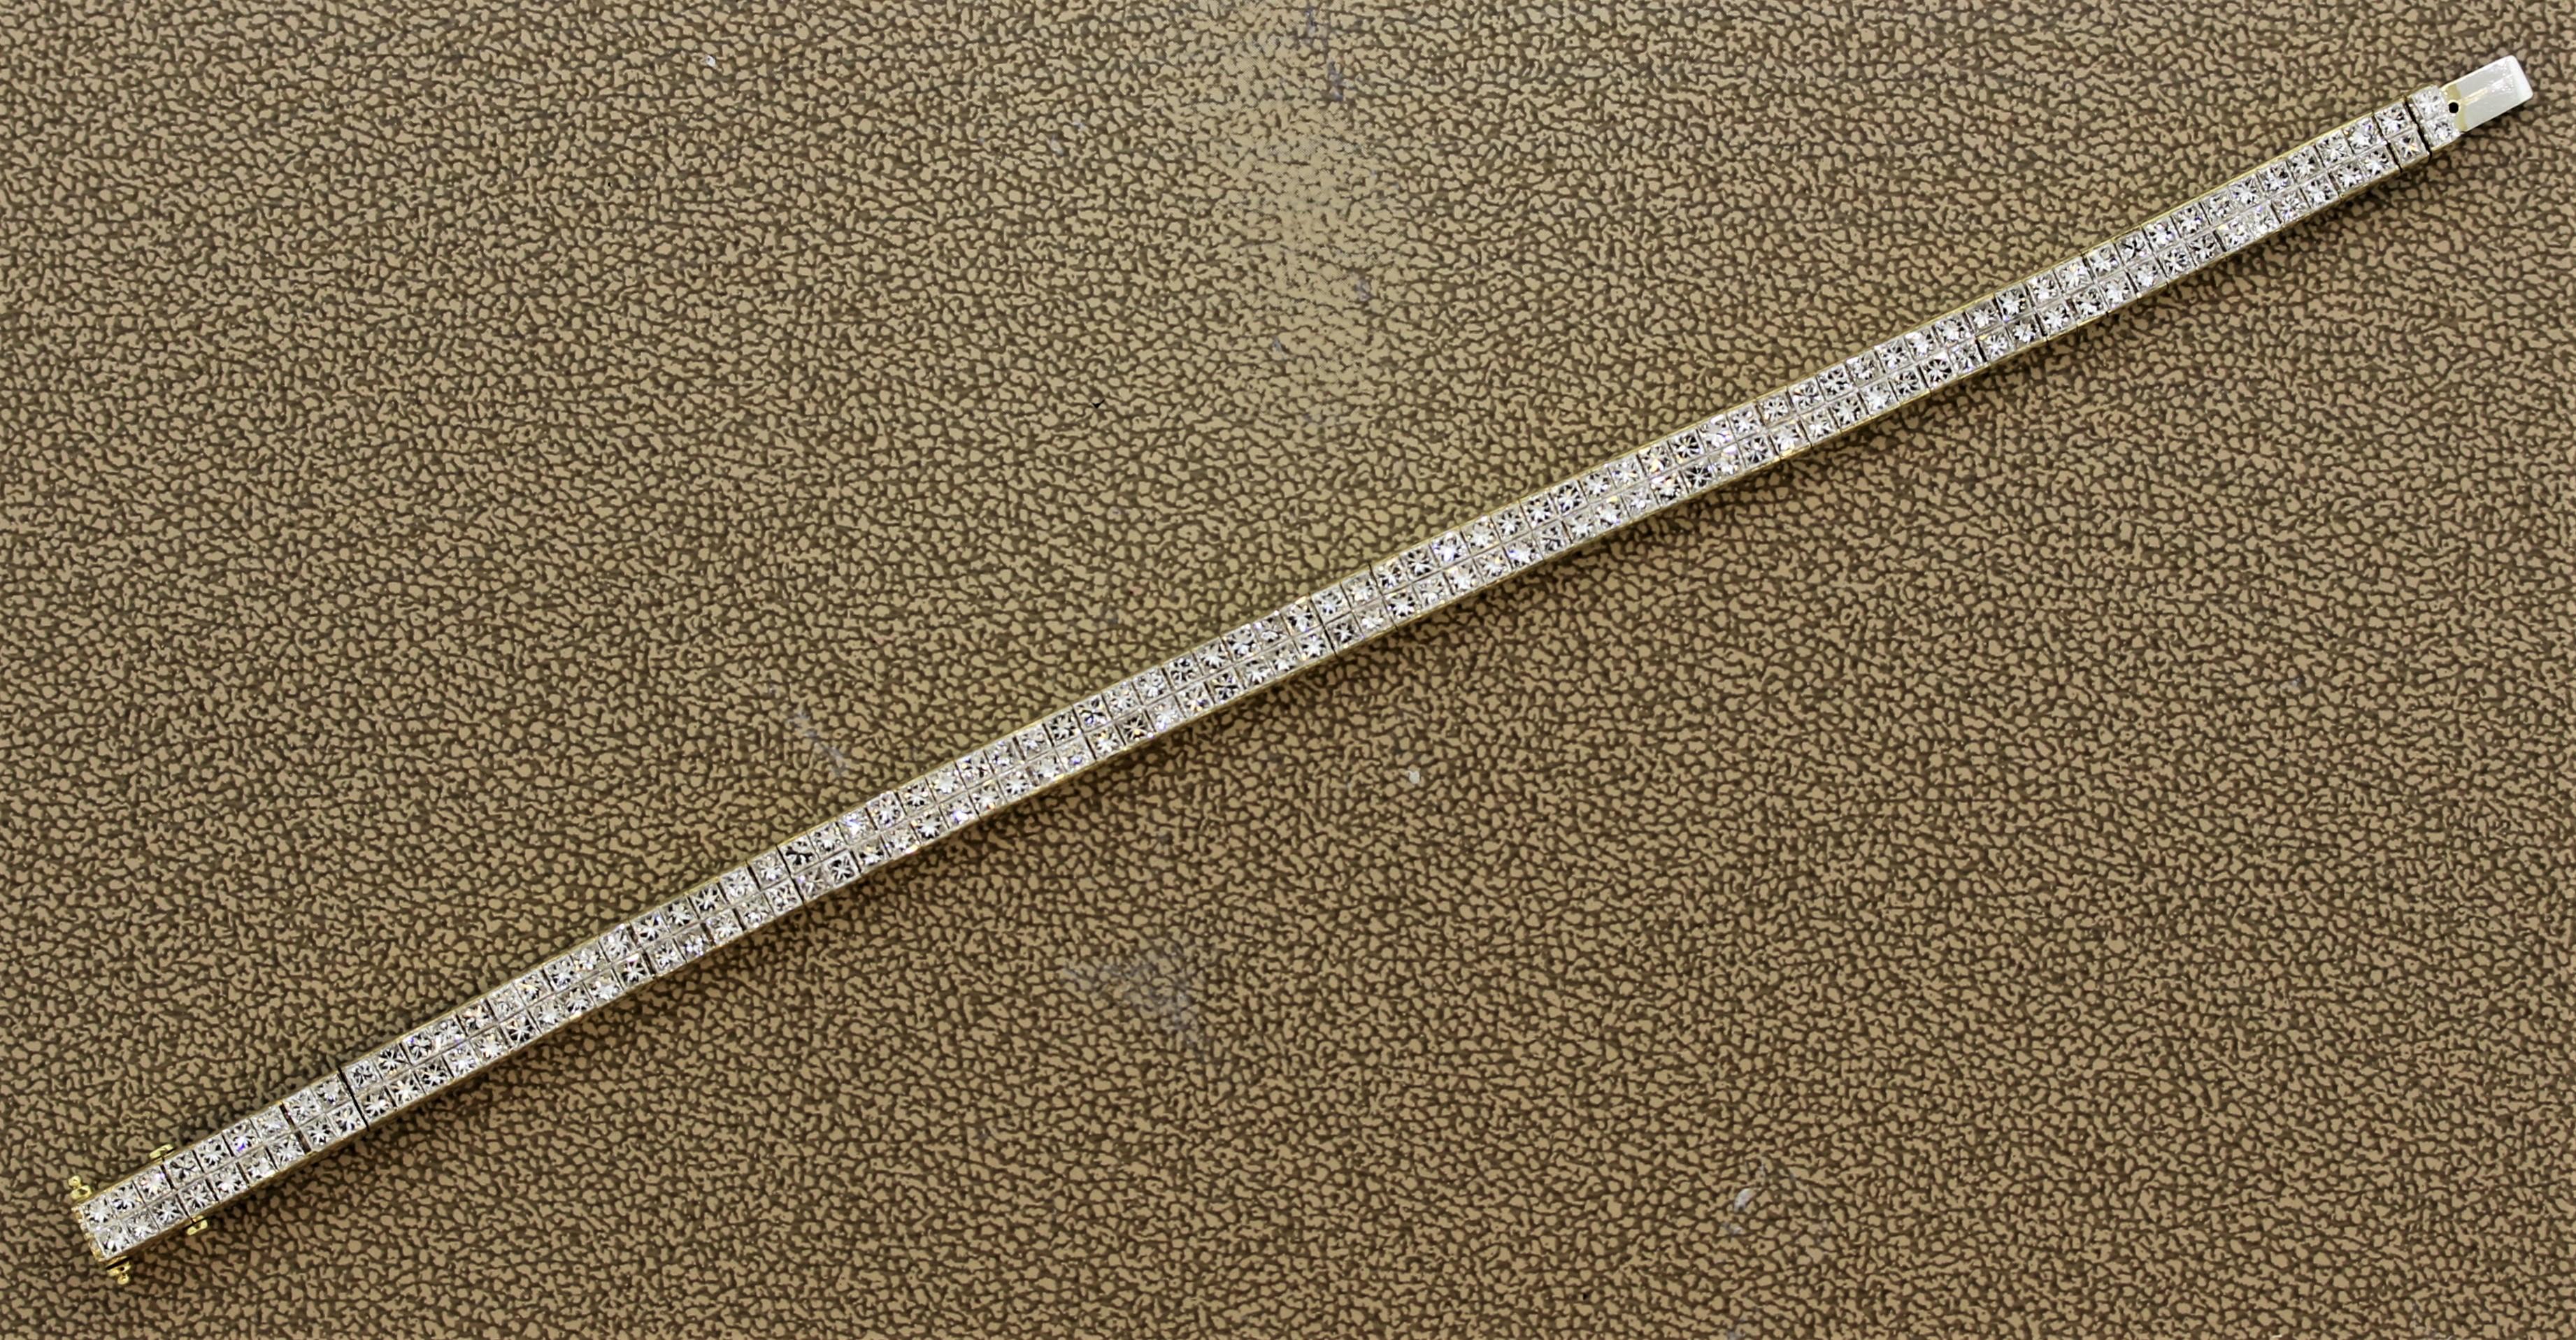 A classic tennis bracelet featuring 10 carats of princess cut diamonds. They are set in two rows using the famed “invisible setting” style. Made in 18k yellow gold and can be worn everyday.

Length: 7.25 inches